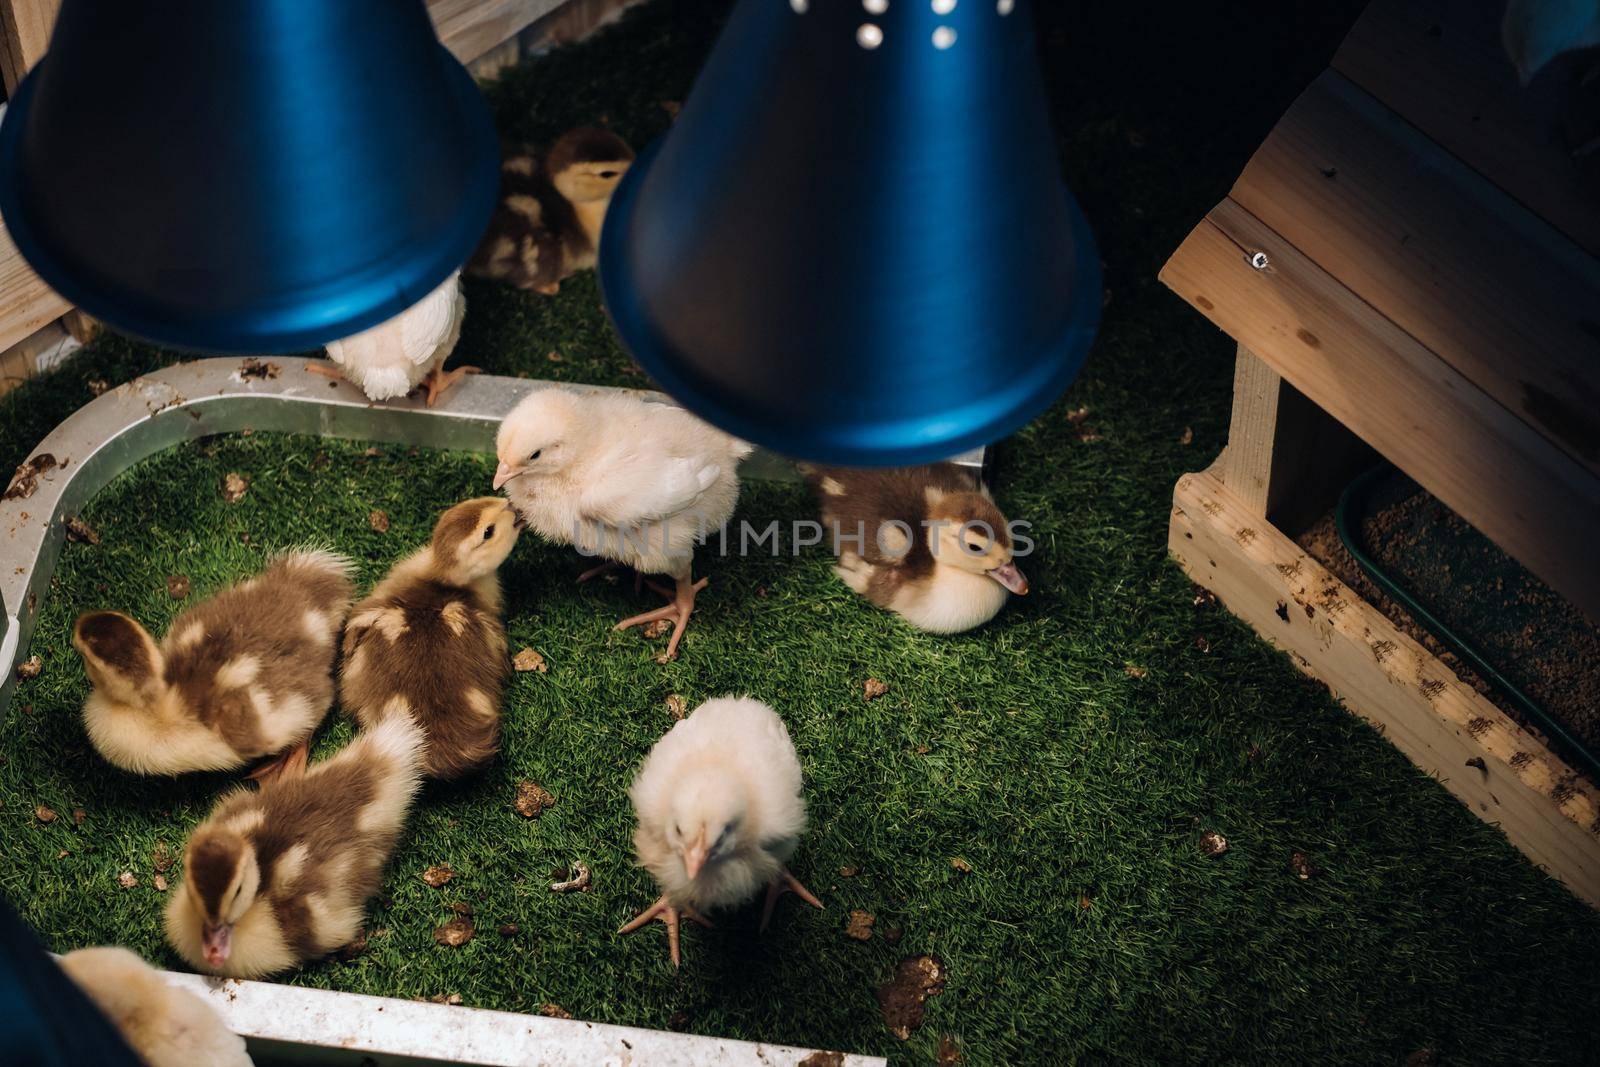 Small chickens and ducklings bask on the grass under a lamp in the yard by Lobachad